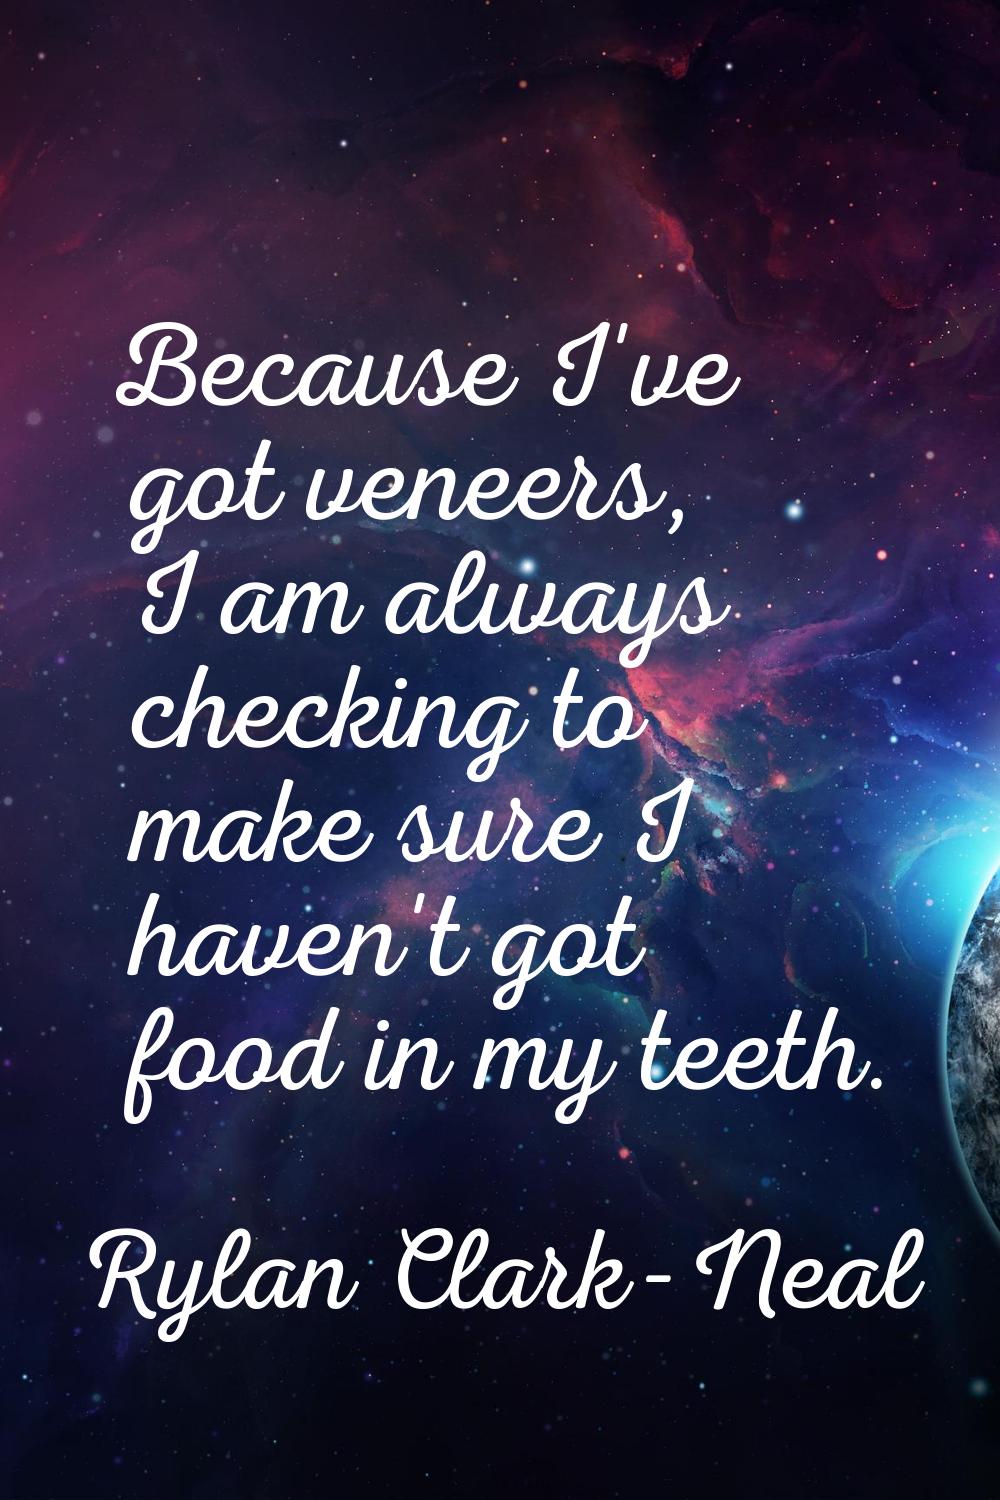 Because I've got veneers, I am always checking to make sure I haven't got food in my teeth.